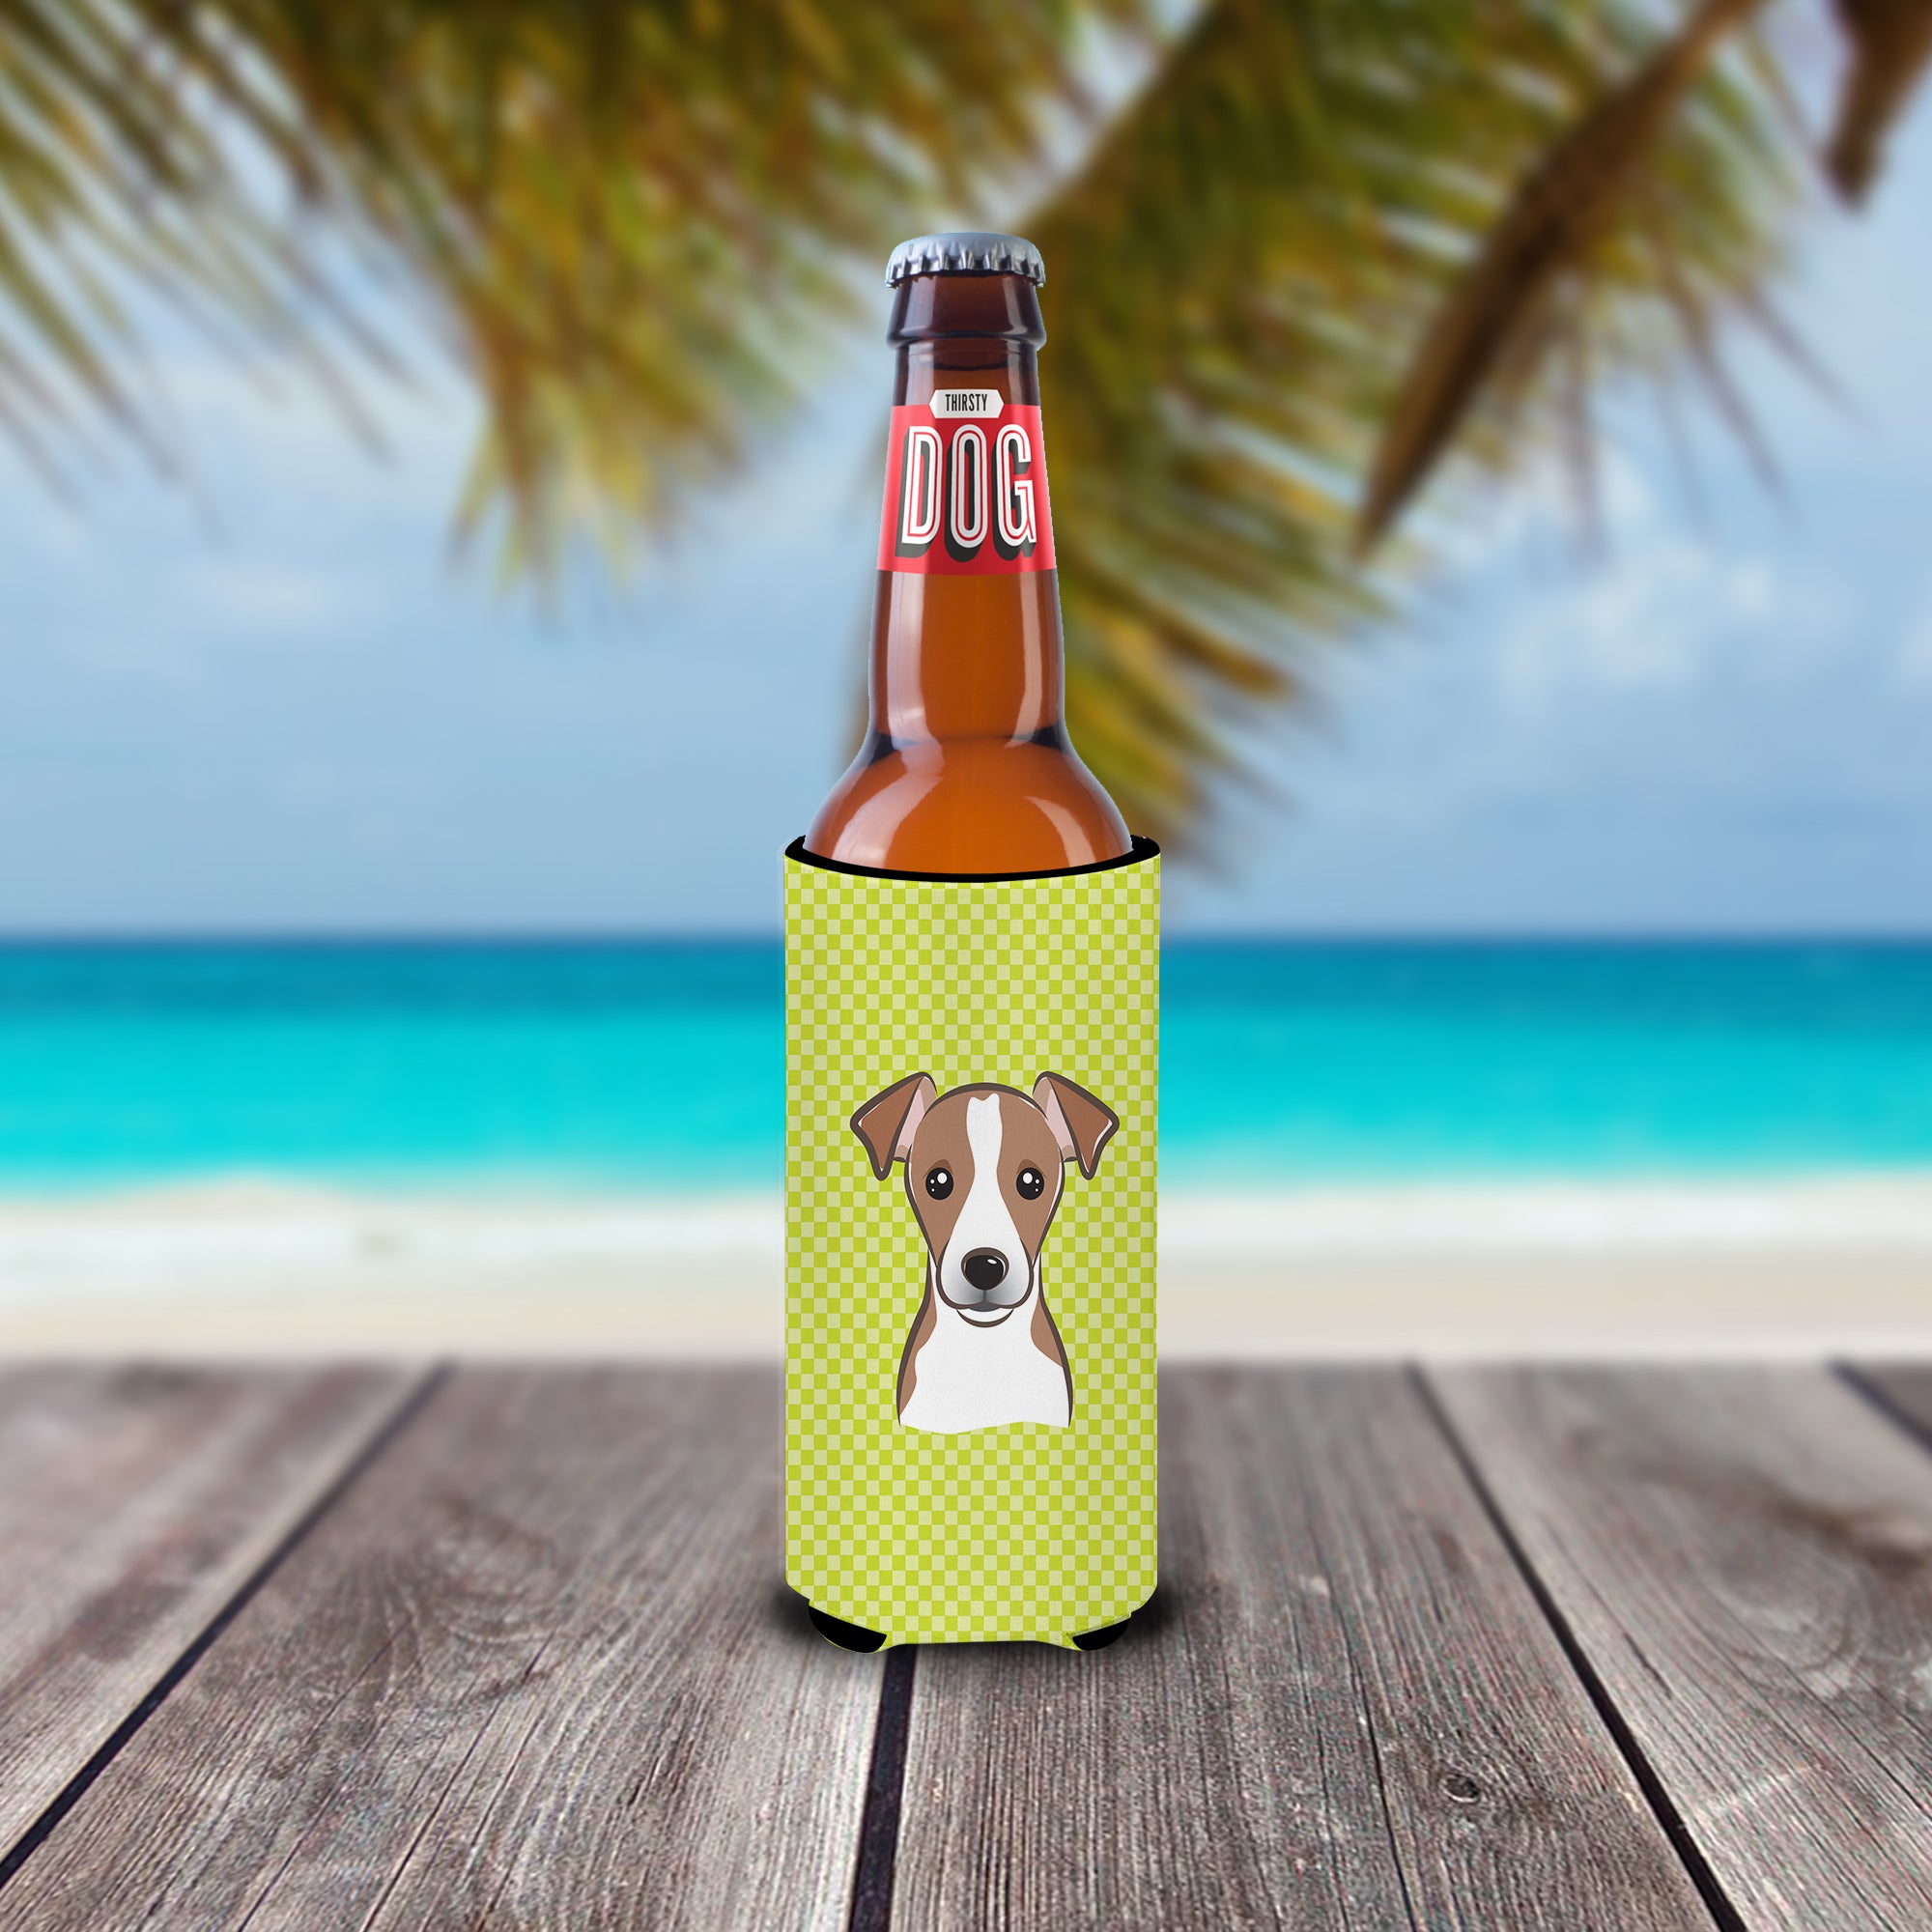 Checkerboard Lime Jack Russell Terrier Ultra Beverage Insulators for slim cans.